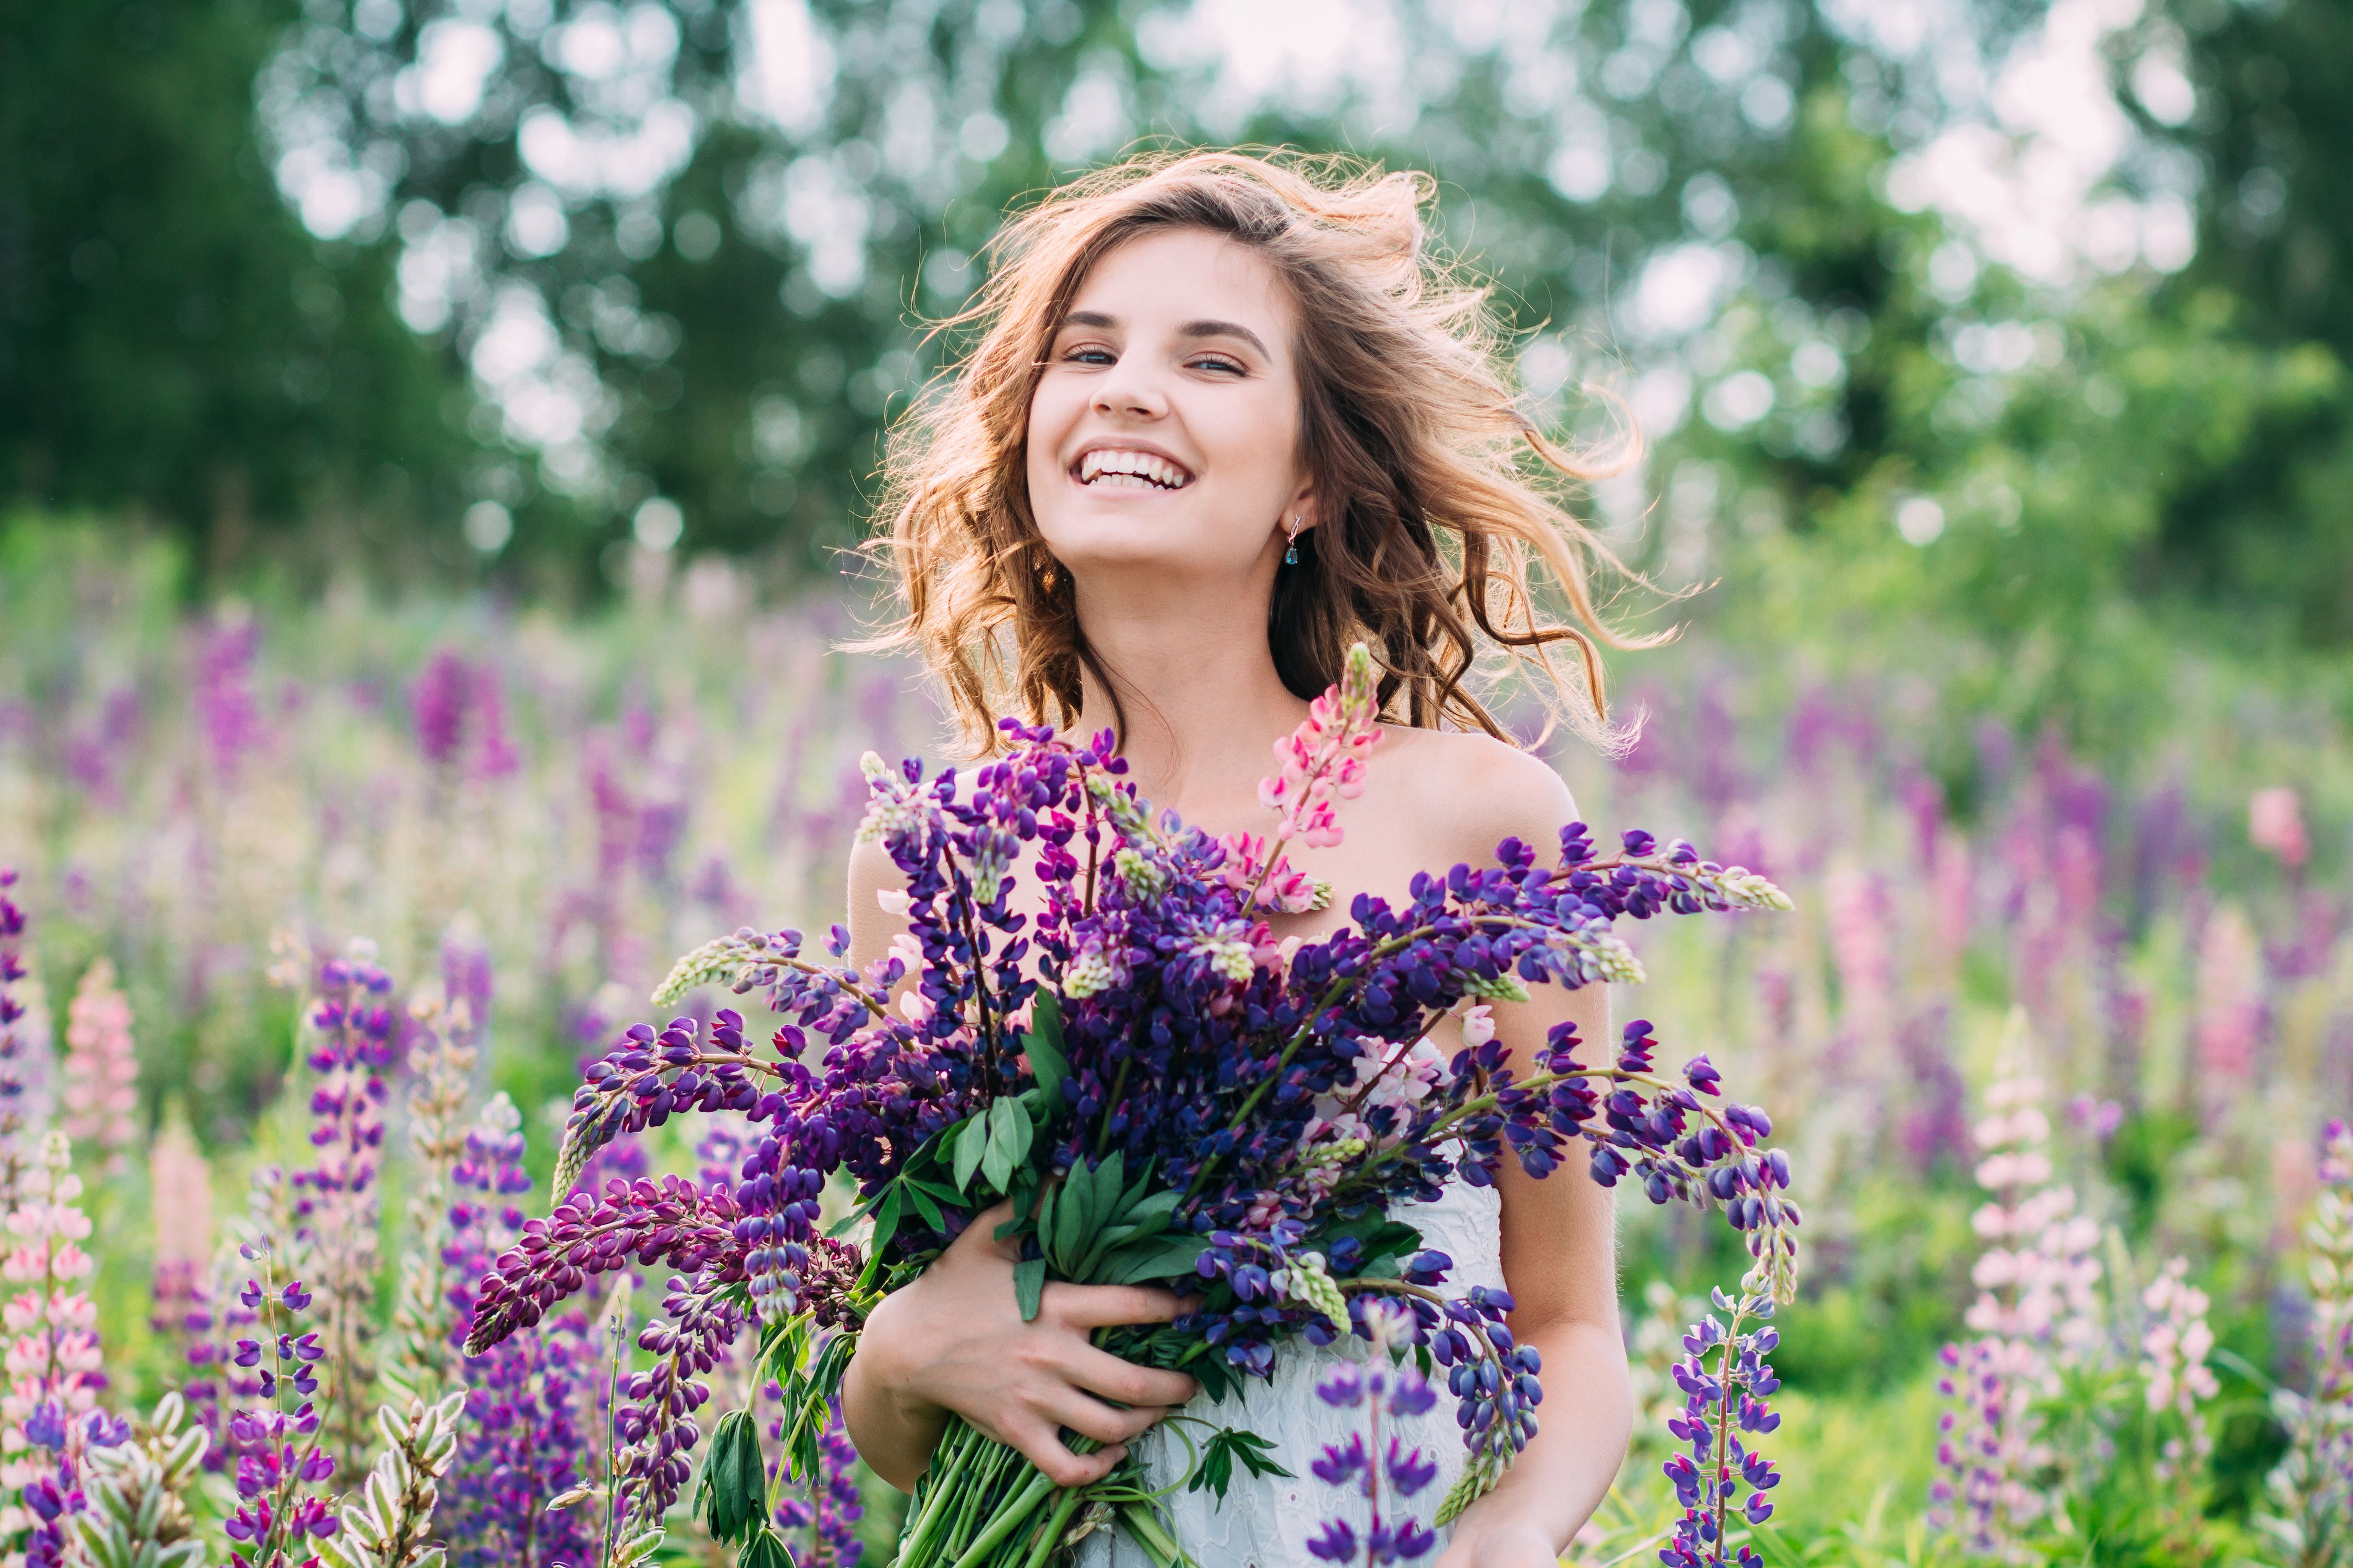 30+ Best Natural Mood Boosters in 2020 [Science-Based]